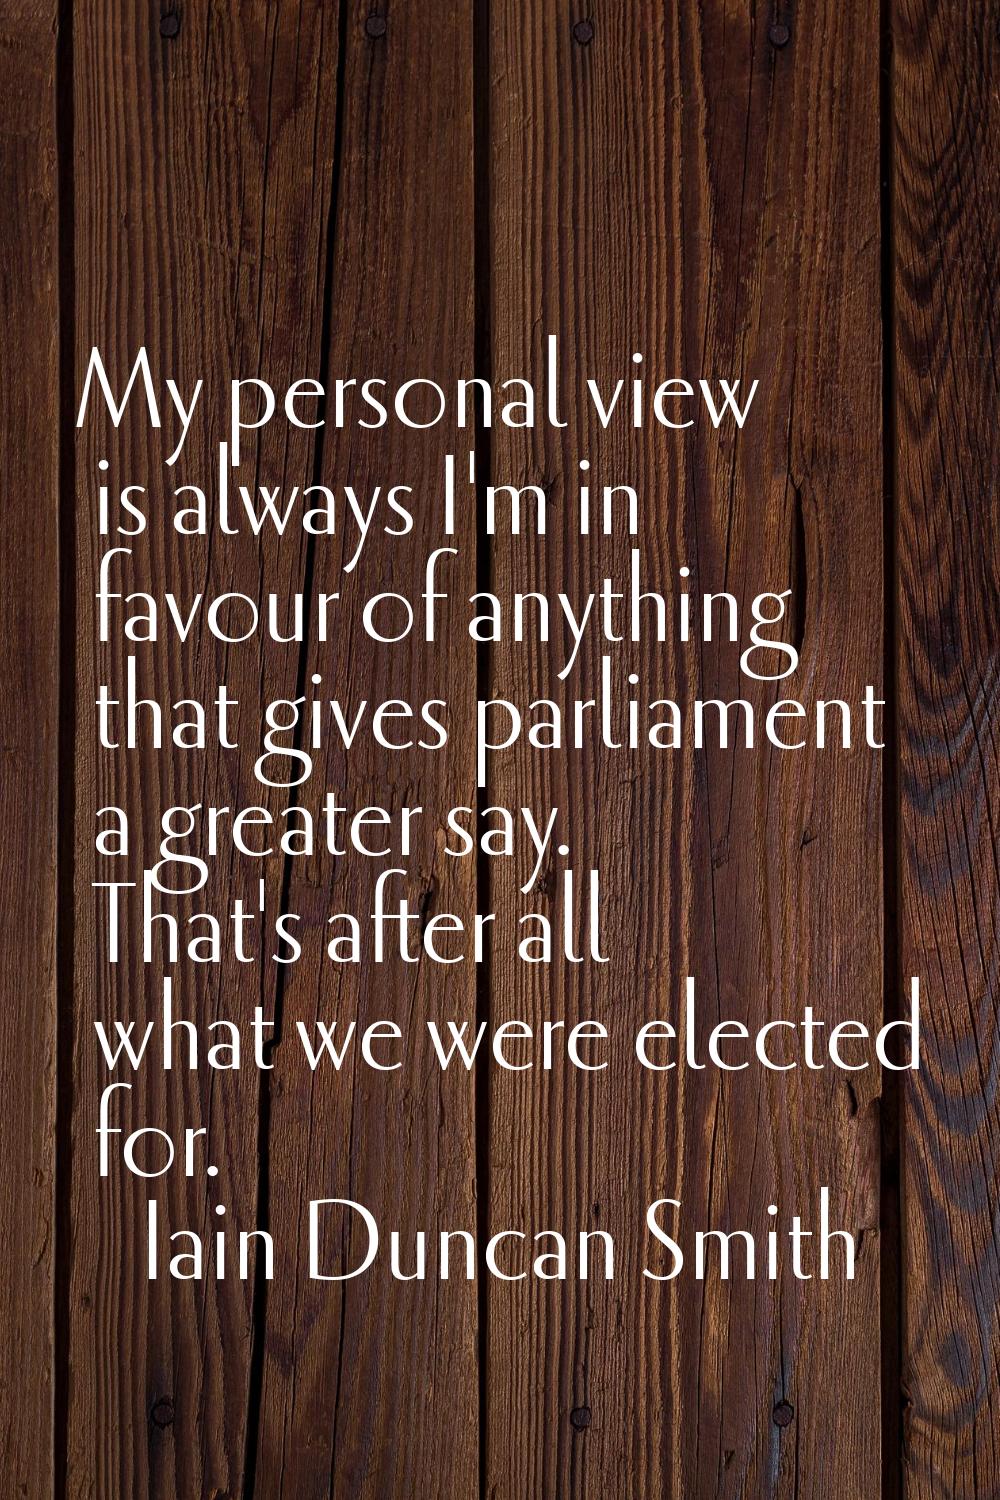 My personal view is always I'm in favour of anything that gives parliament a greater say. That's af